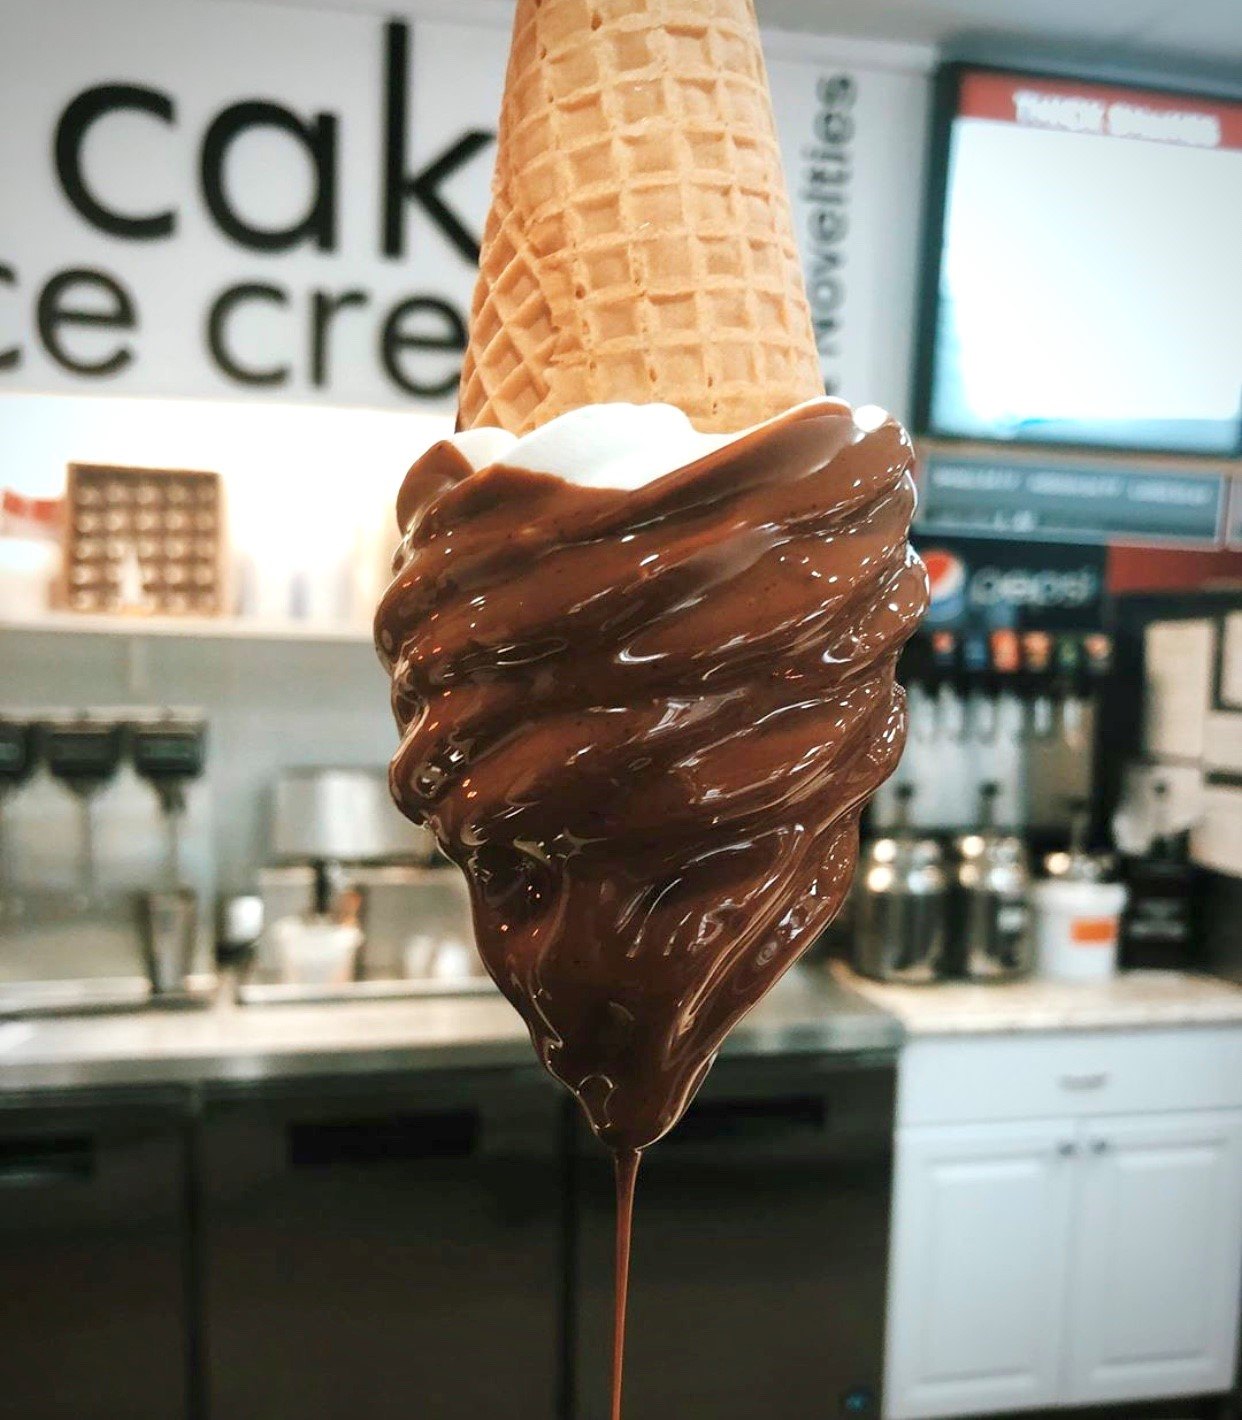 Upside down vanilla ice cream cone being dipped in chocolate